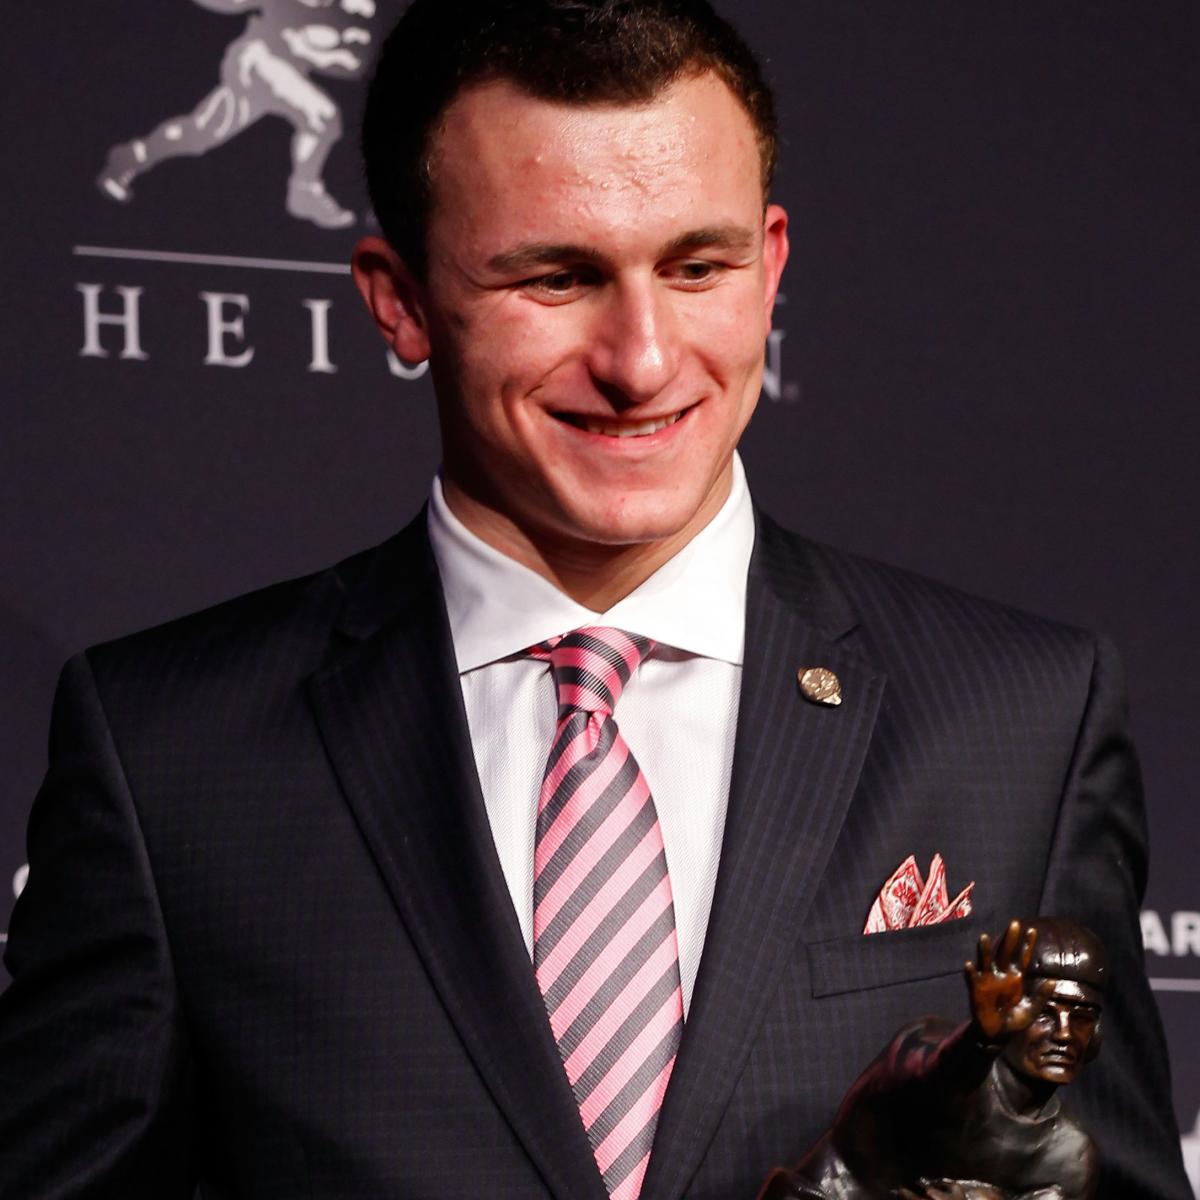 Keeping Heisman Contender Johnny Manziel On Target and In Line